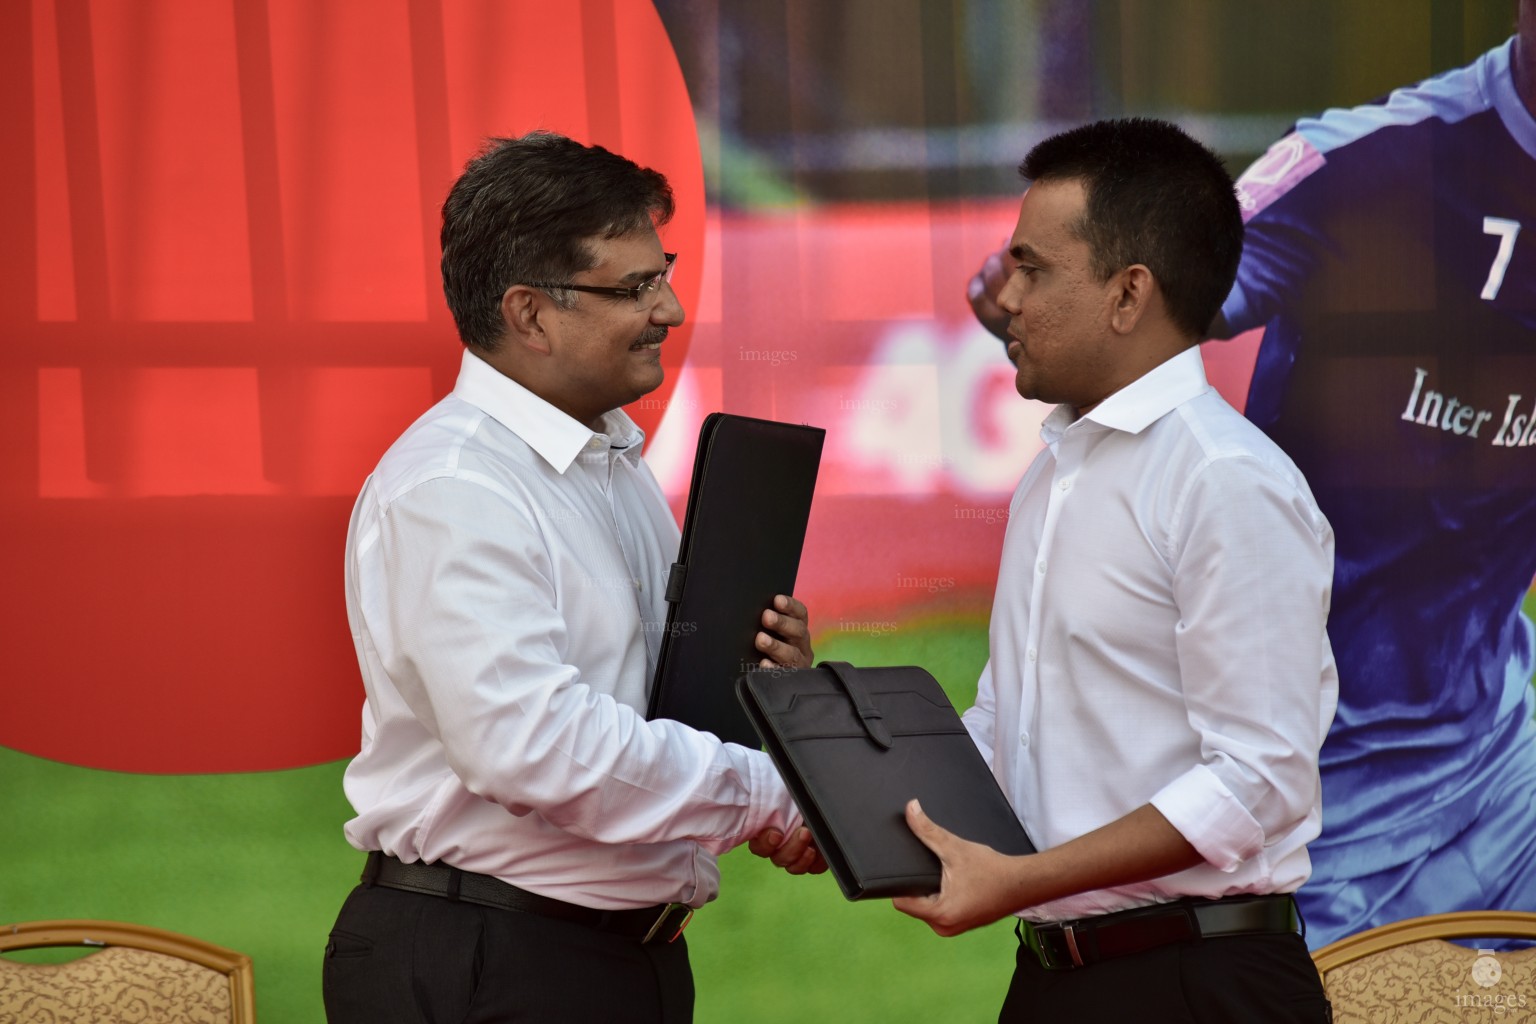 New Radiant SC becomes Brand Ambassador for Ooredoo, 29th January 2018 (Photo: Ismail Thoriq / images.mv)